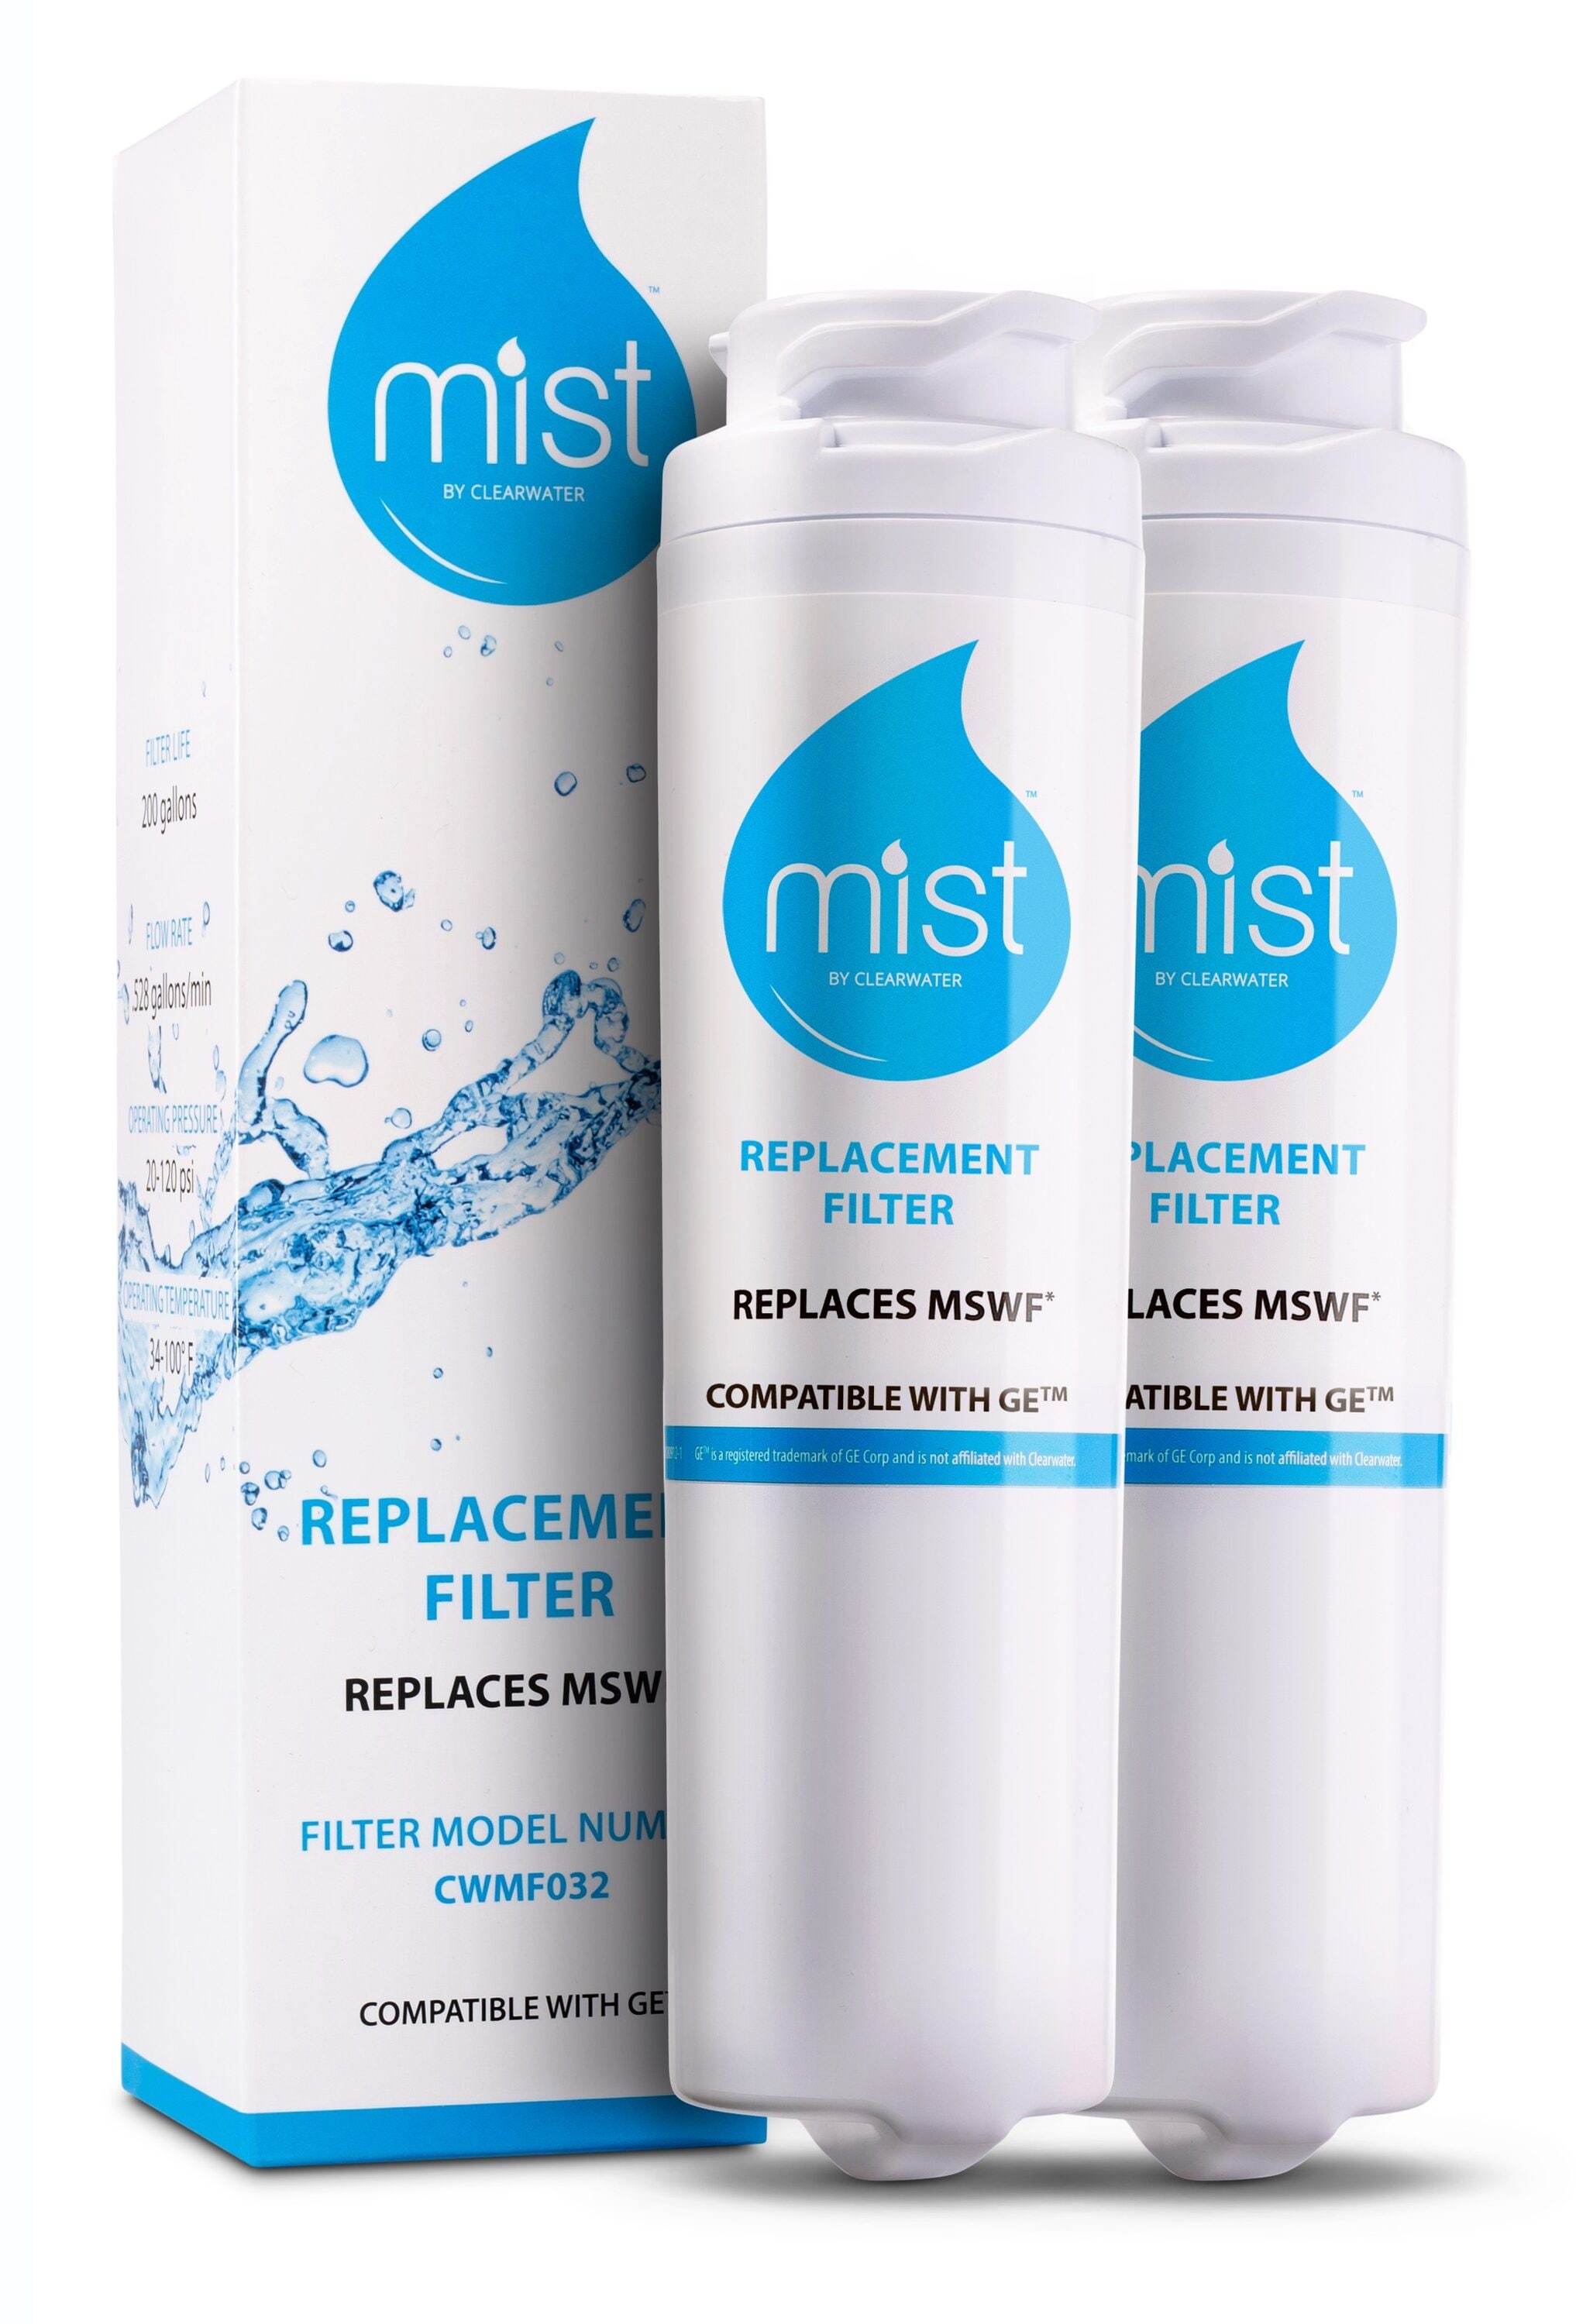 mswf-refrigerator-water-filters-at-lowes